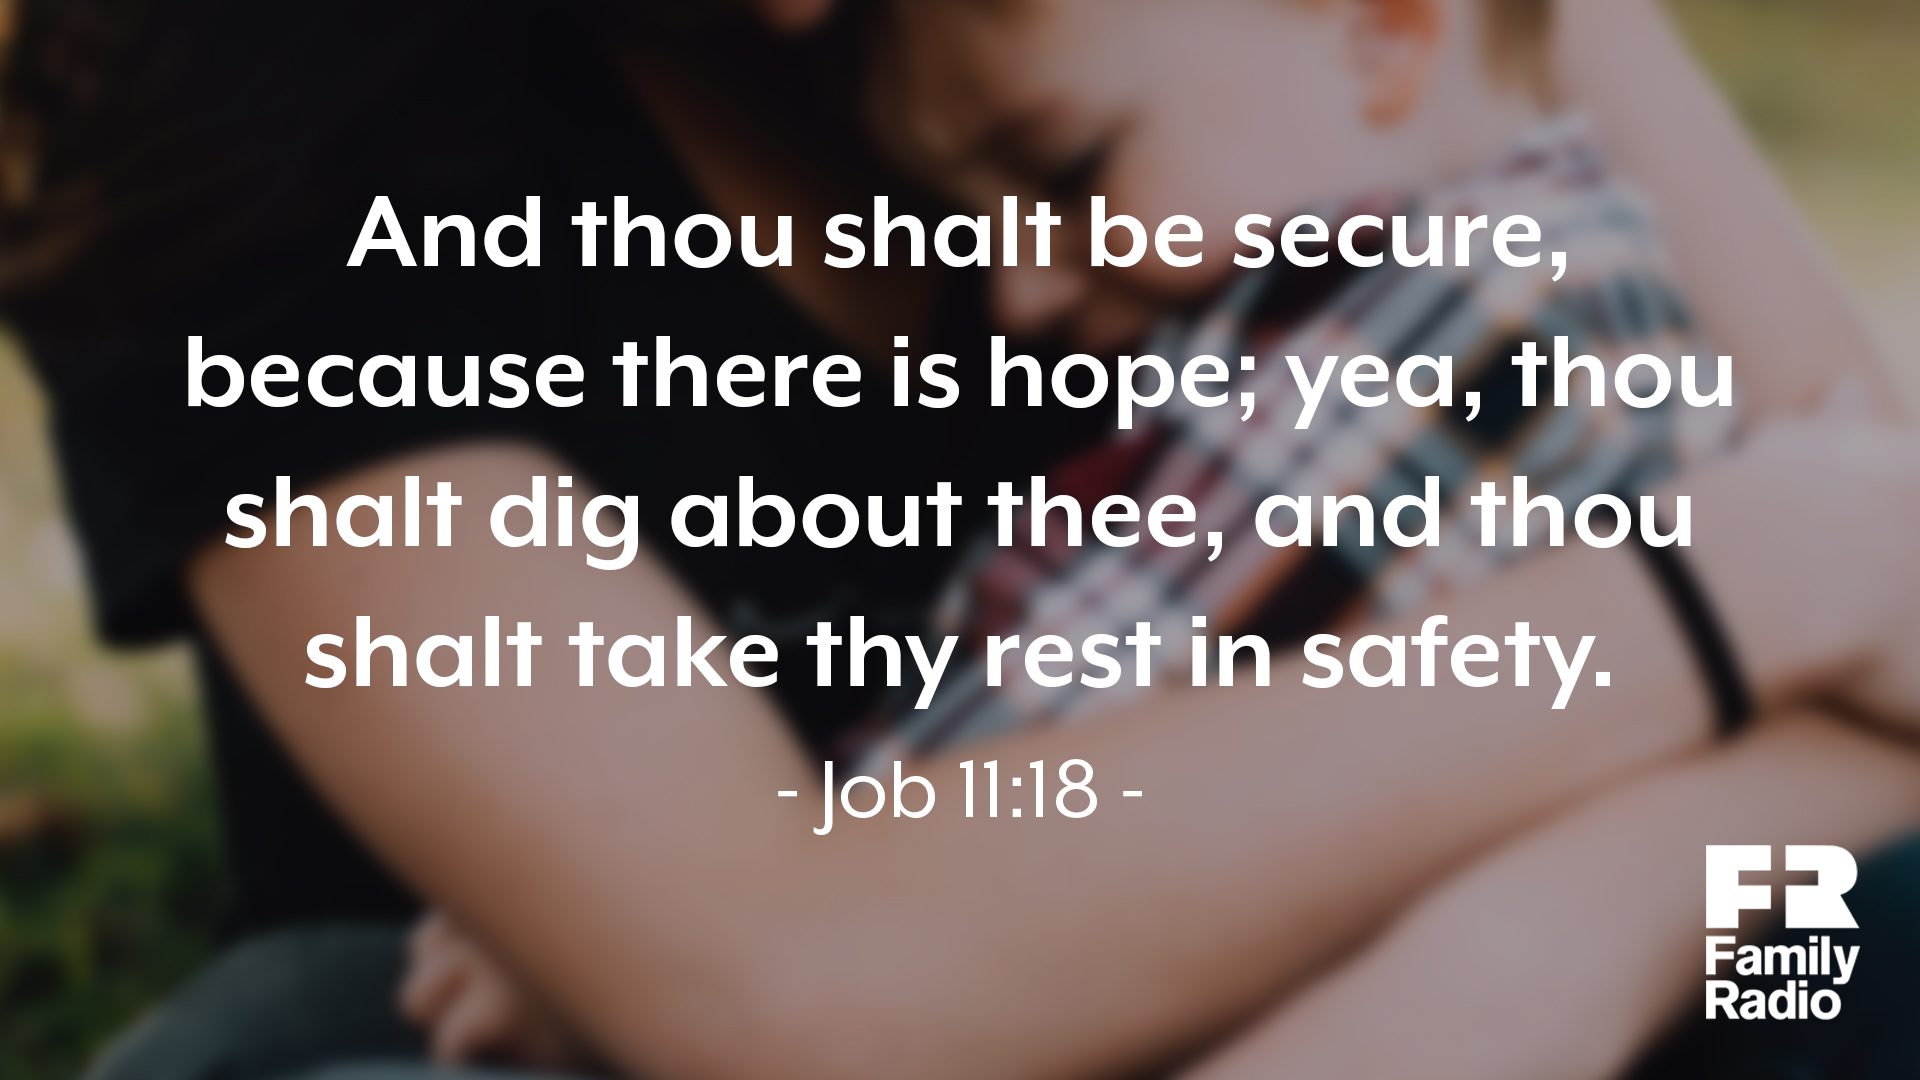 "And thou shalt be secure, because there is hope; yea, thou shalt dig about thee, and thou shalt take they rest in safety."